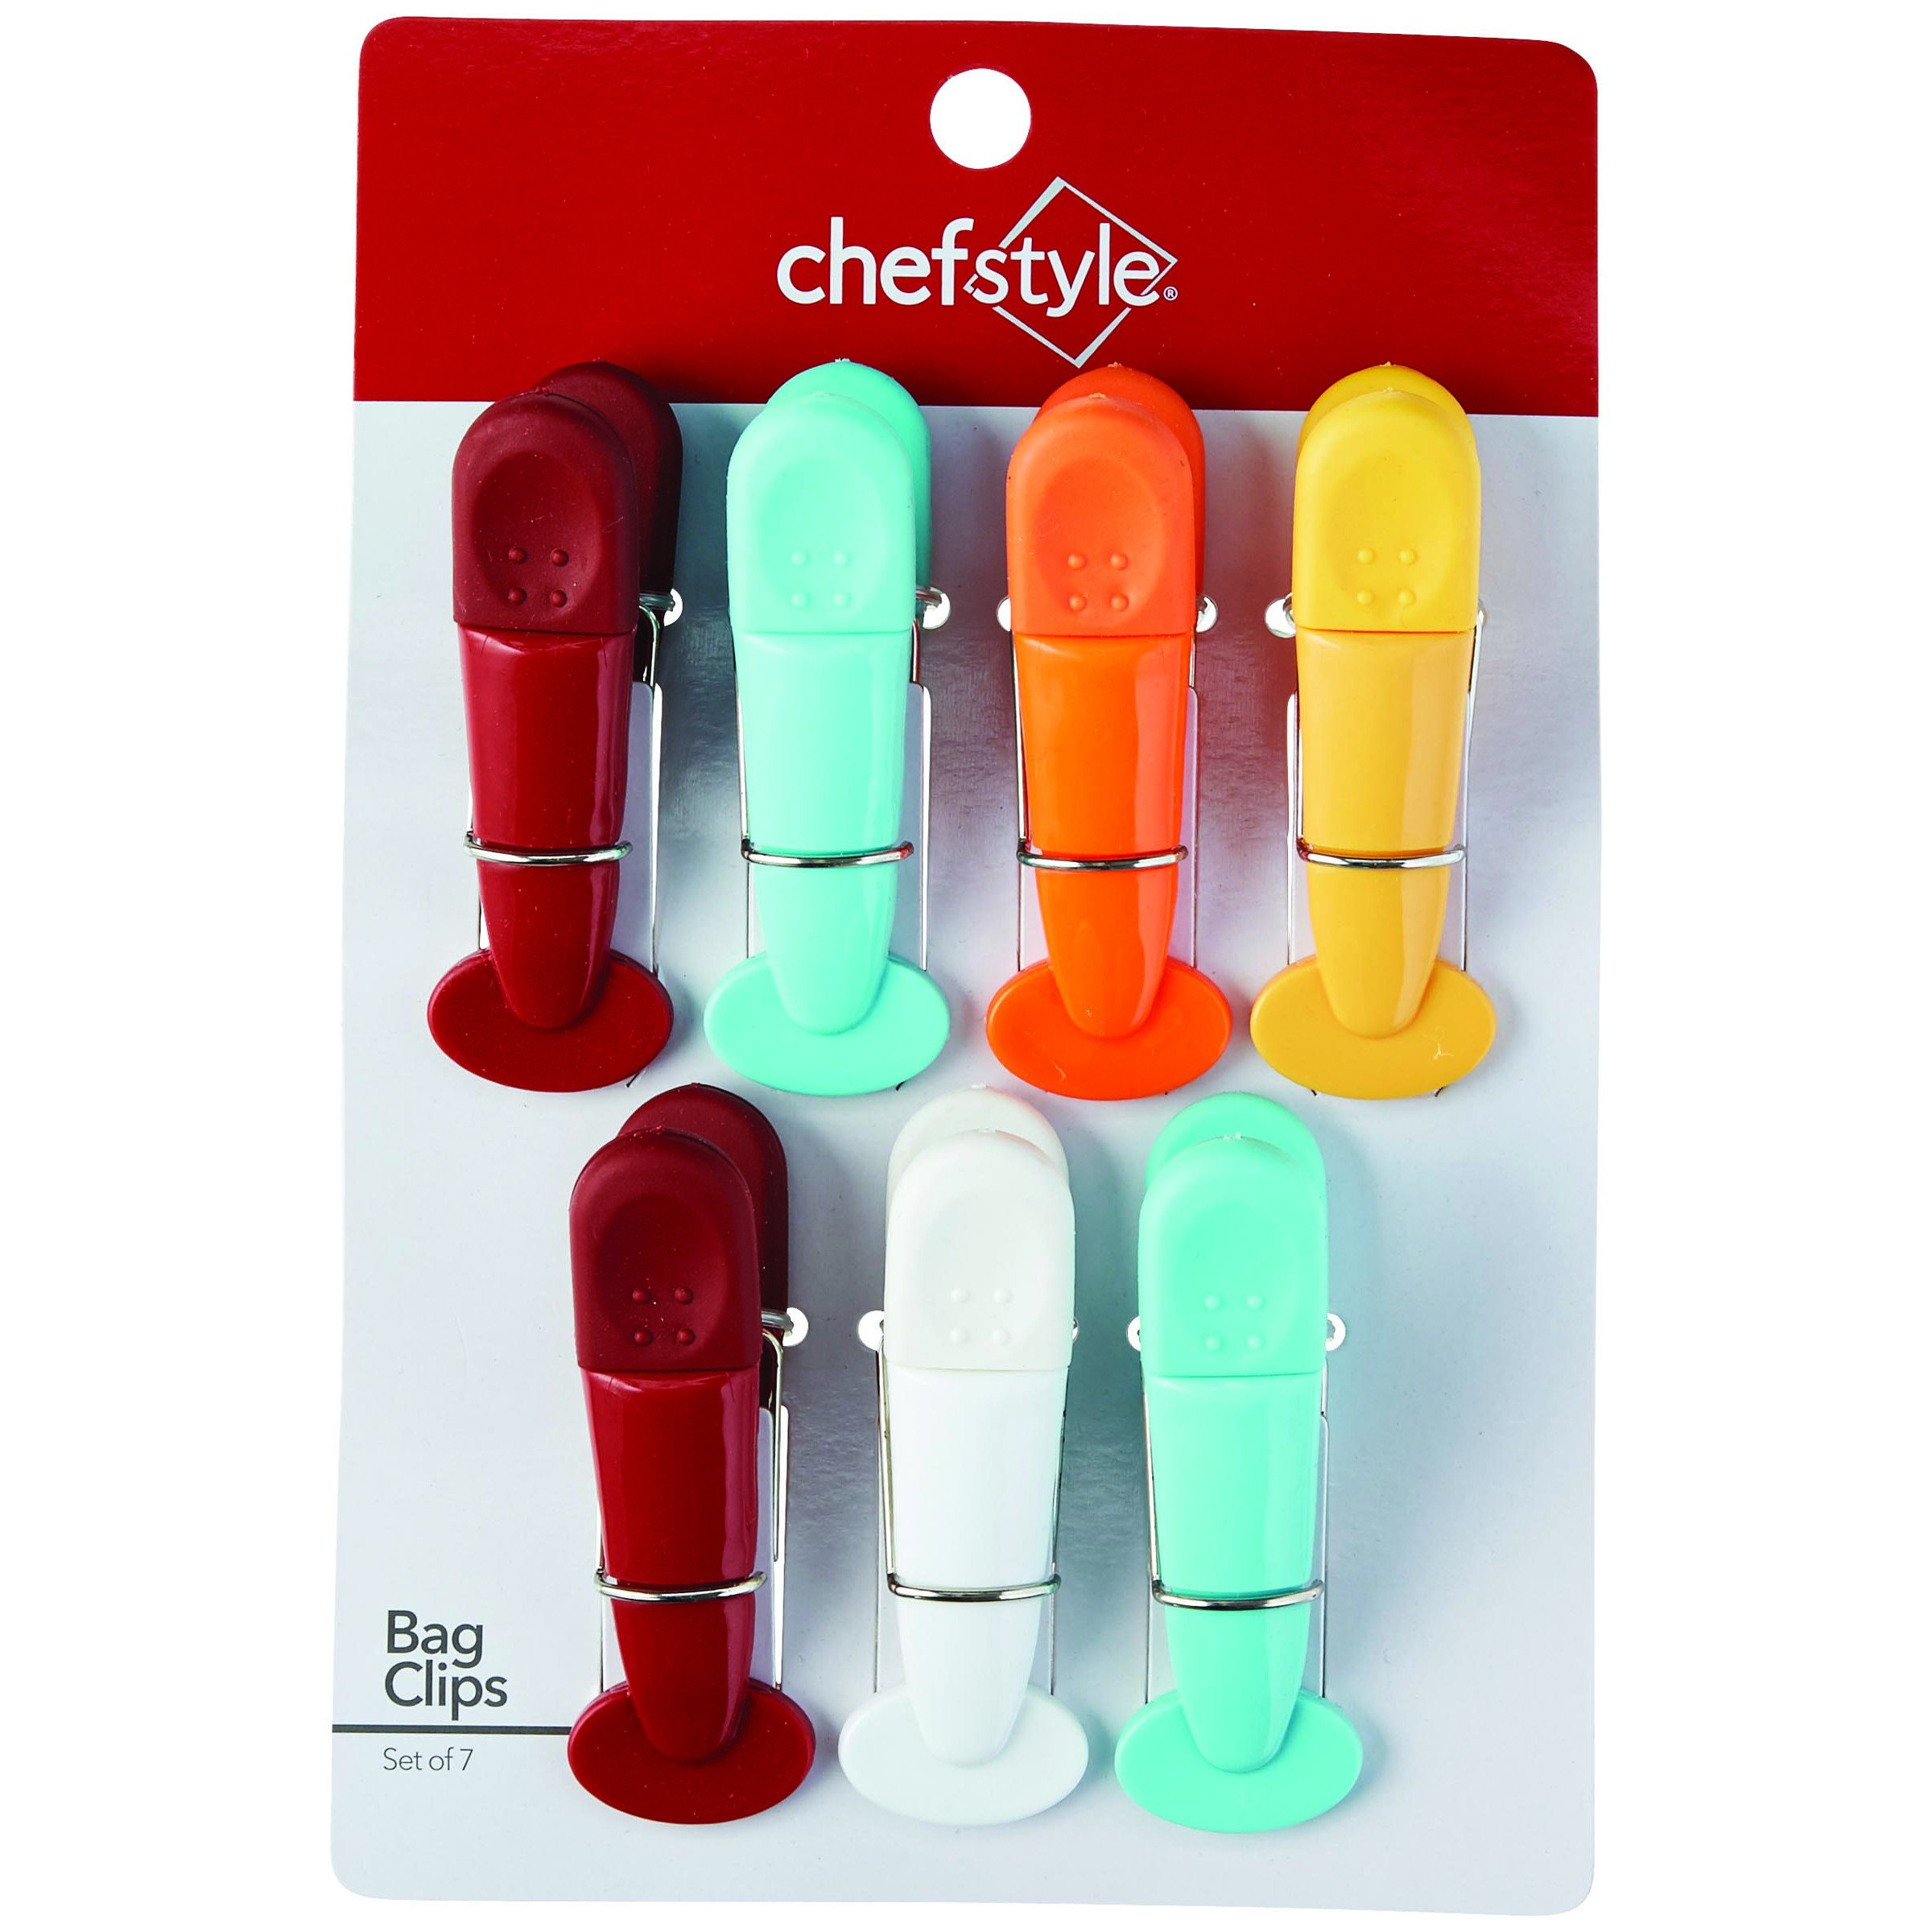 Set of 6 handy magnetic food kitchen BAG CLIPS in assorted colors NEW!